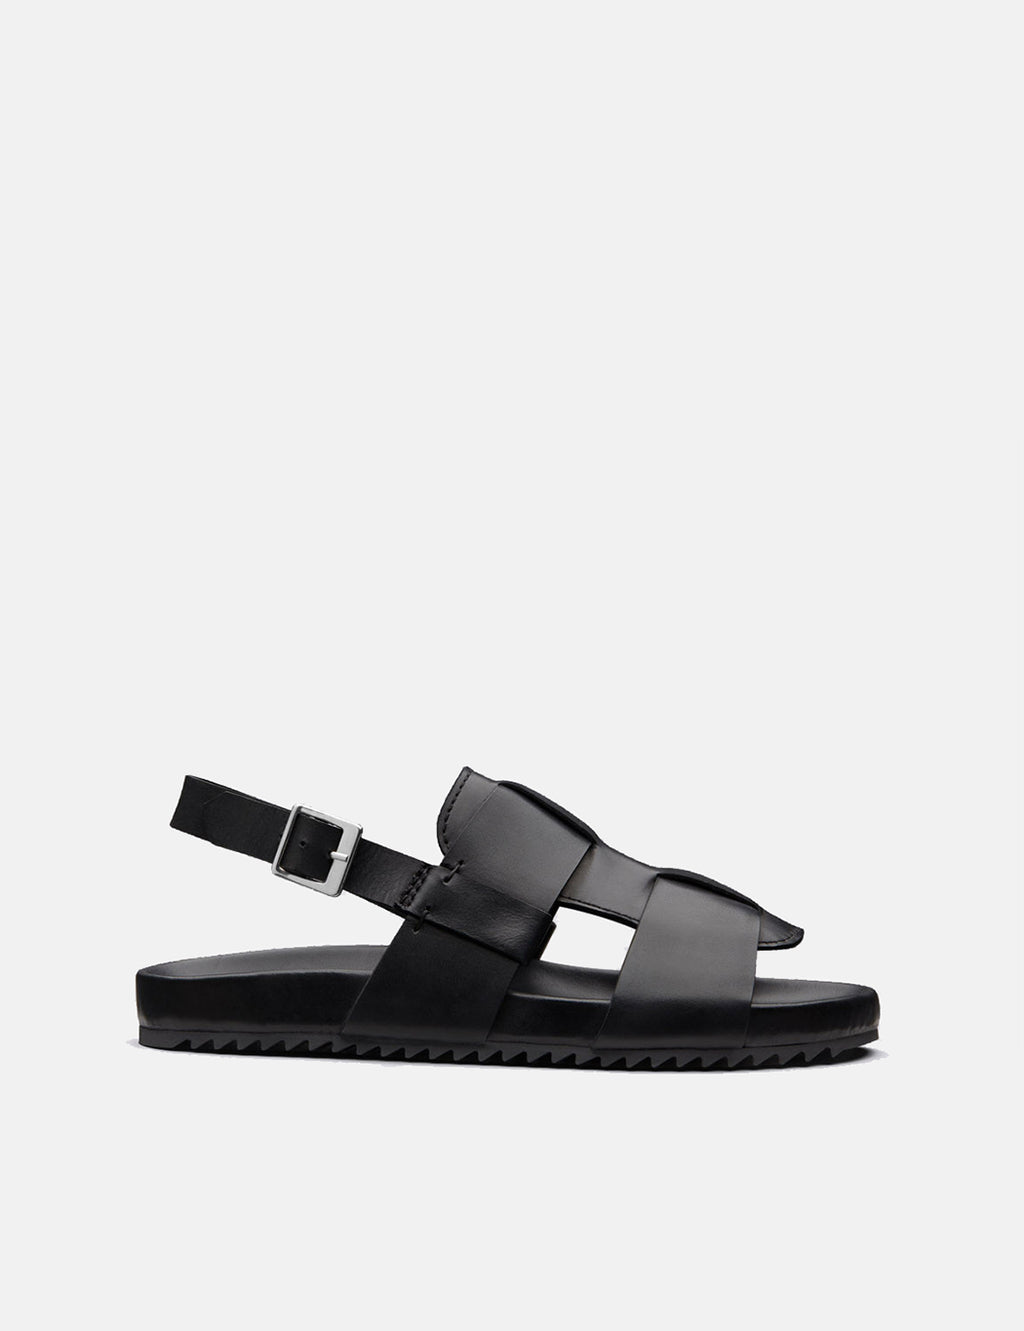 Grenson Wiley Sandal (Leather) - Black | URBAN EXCESS.